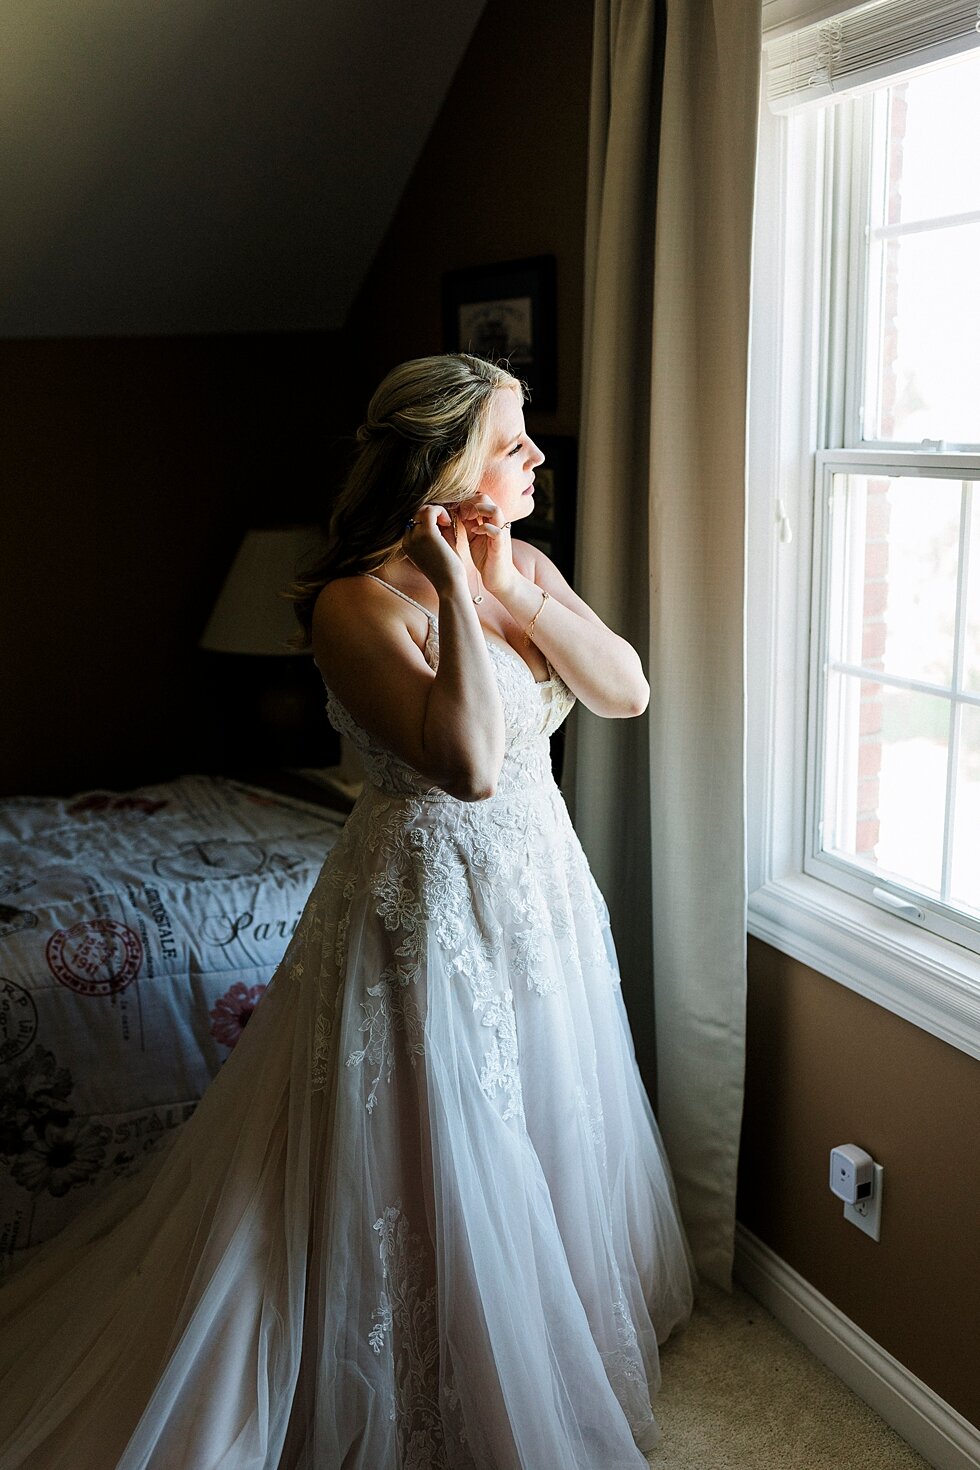  Taking the final moments as she prepares to walk down the aisle to apply the last minute accessories to her ensemble. Romantic casual lace wedding gown close friends neutral colors background wedding natural greenery crisp white #midwestphotographer